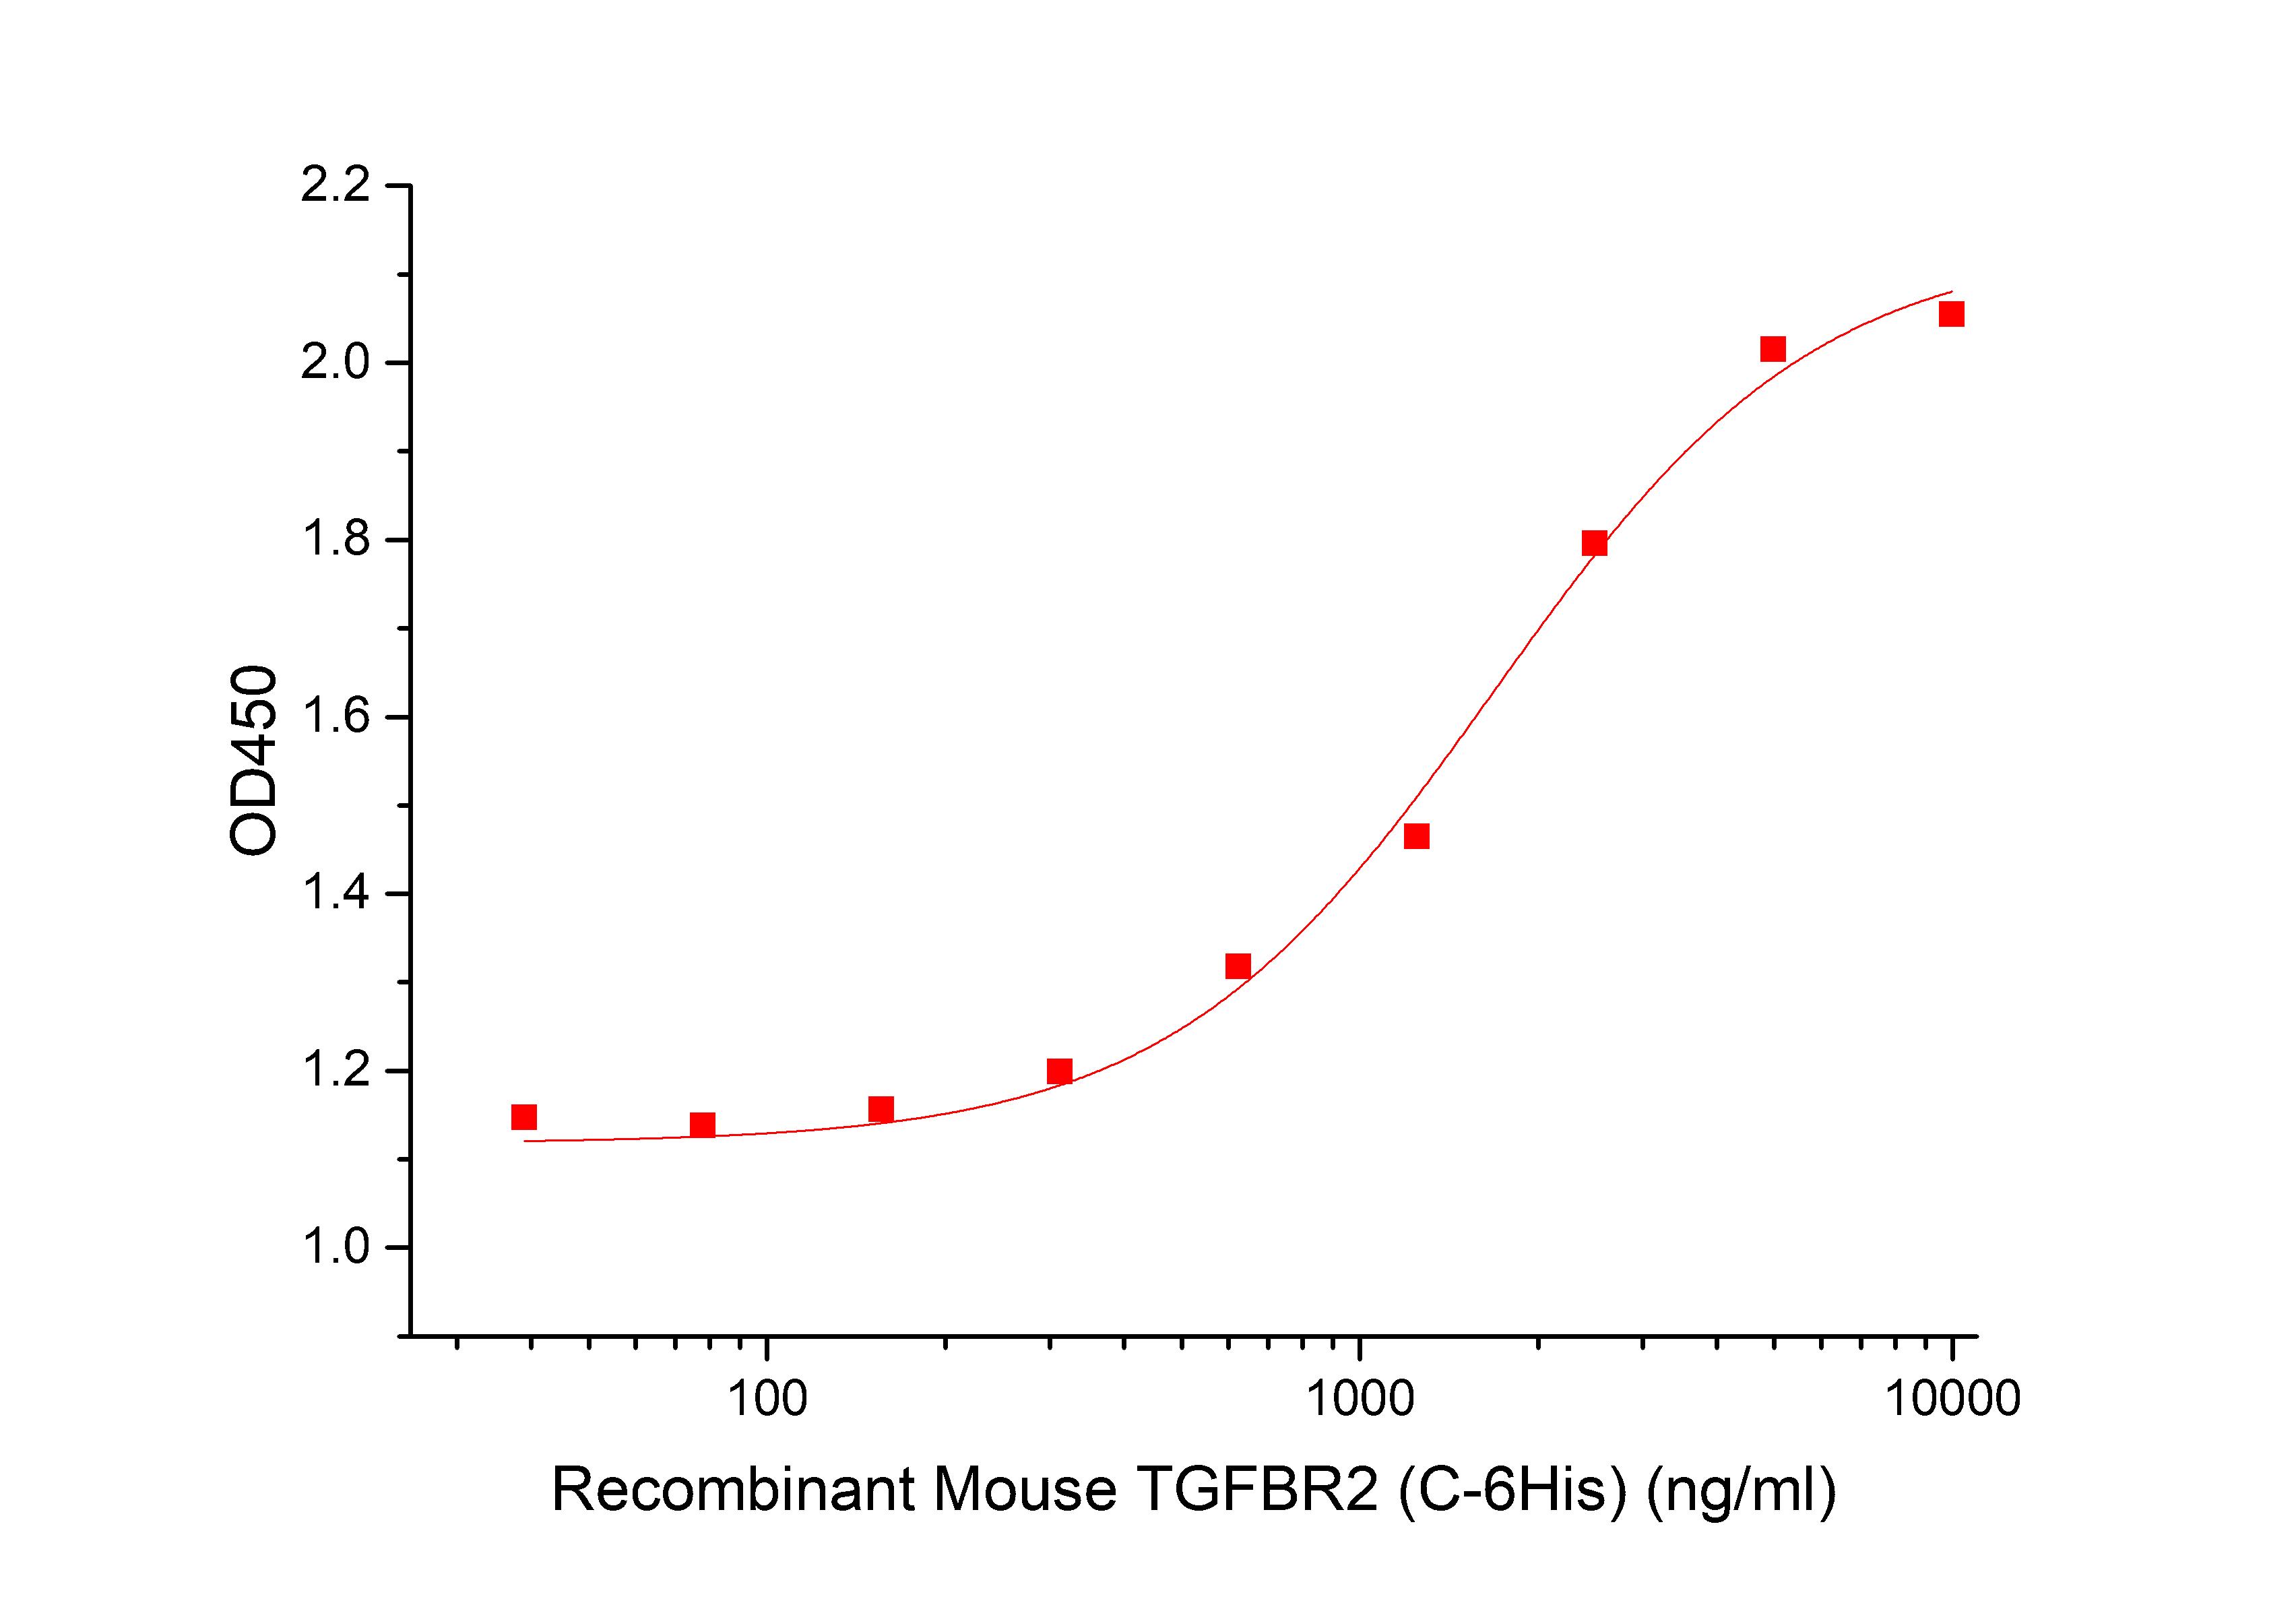 TGFBR2 Protein, Mouse, Recombinant (His)